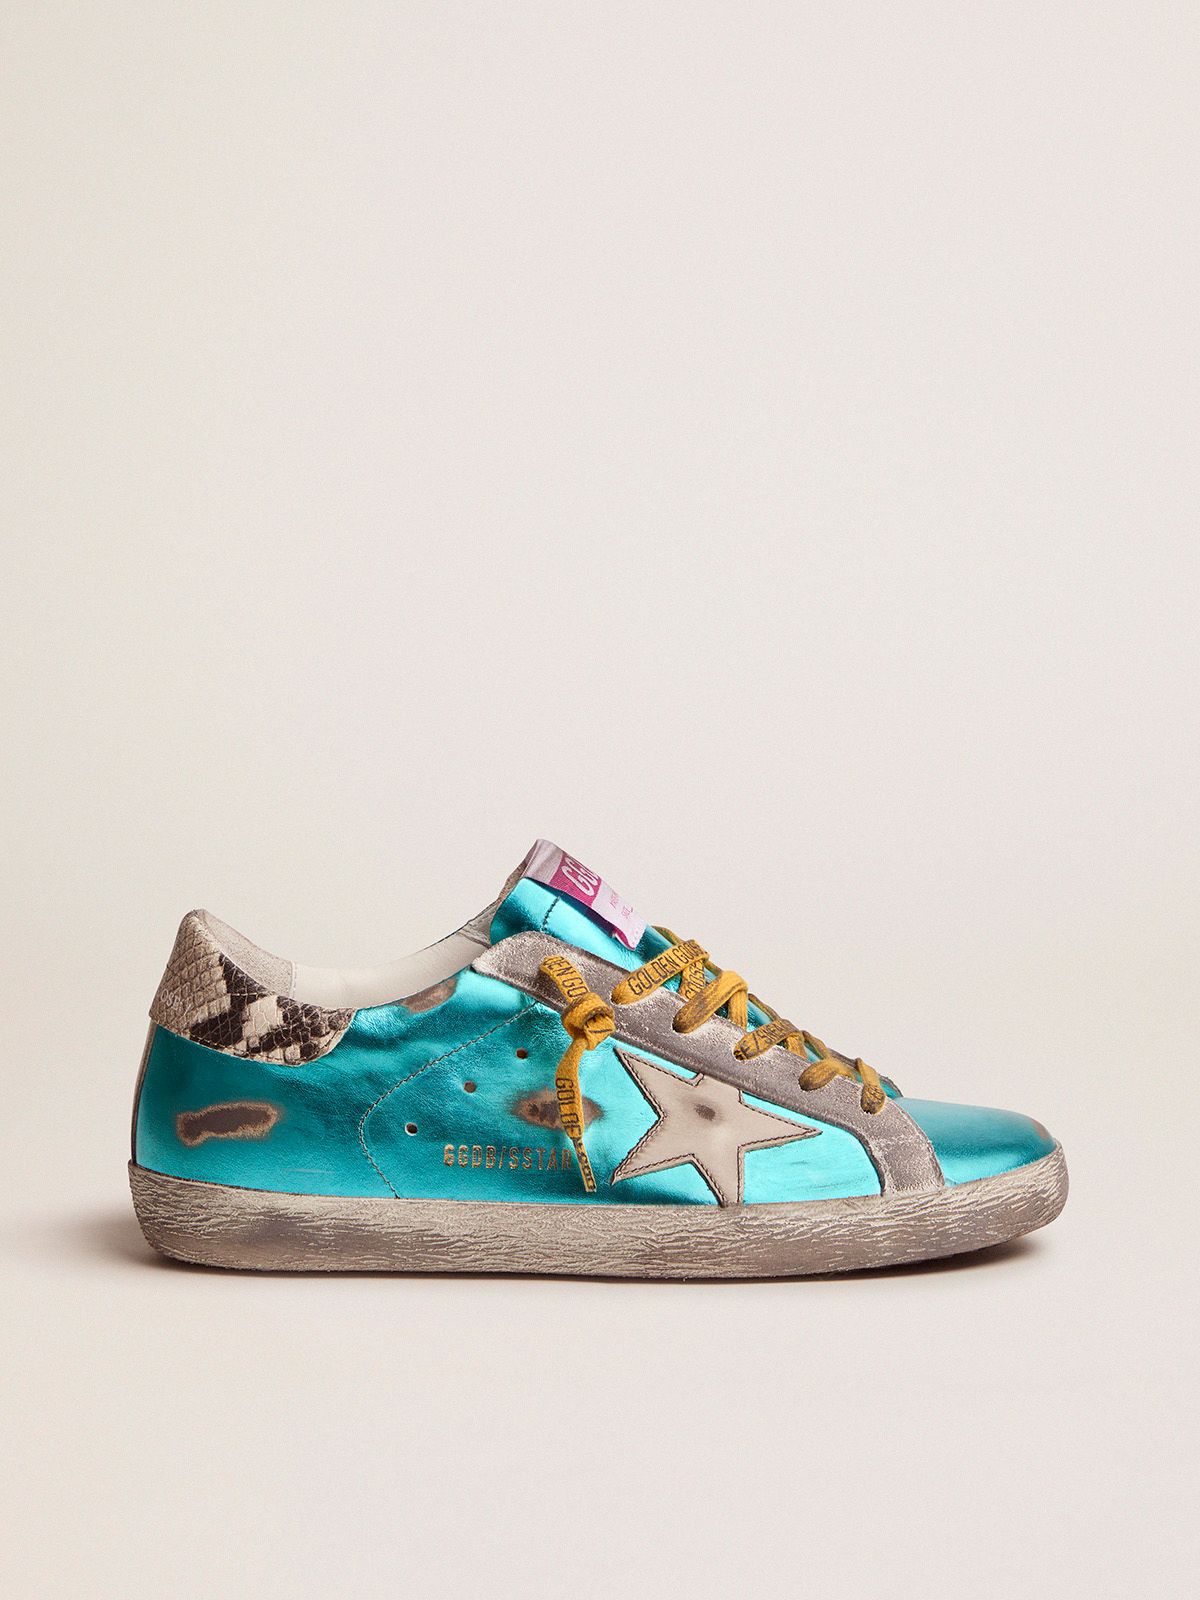 golden goose sneakers heel LTD Super-Star snake-print with green tab laminated Turquoise